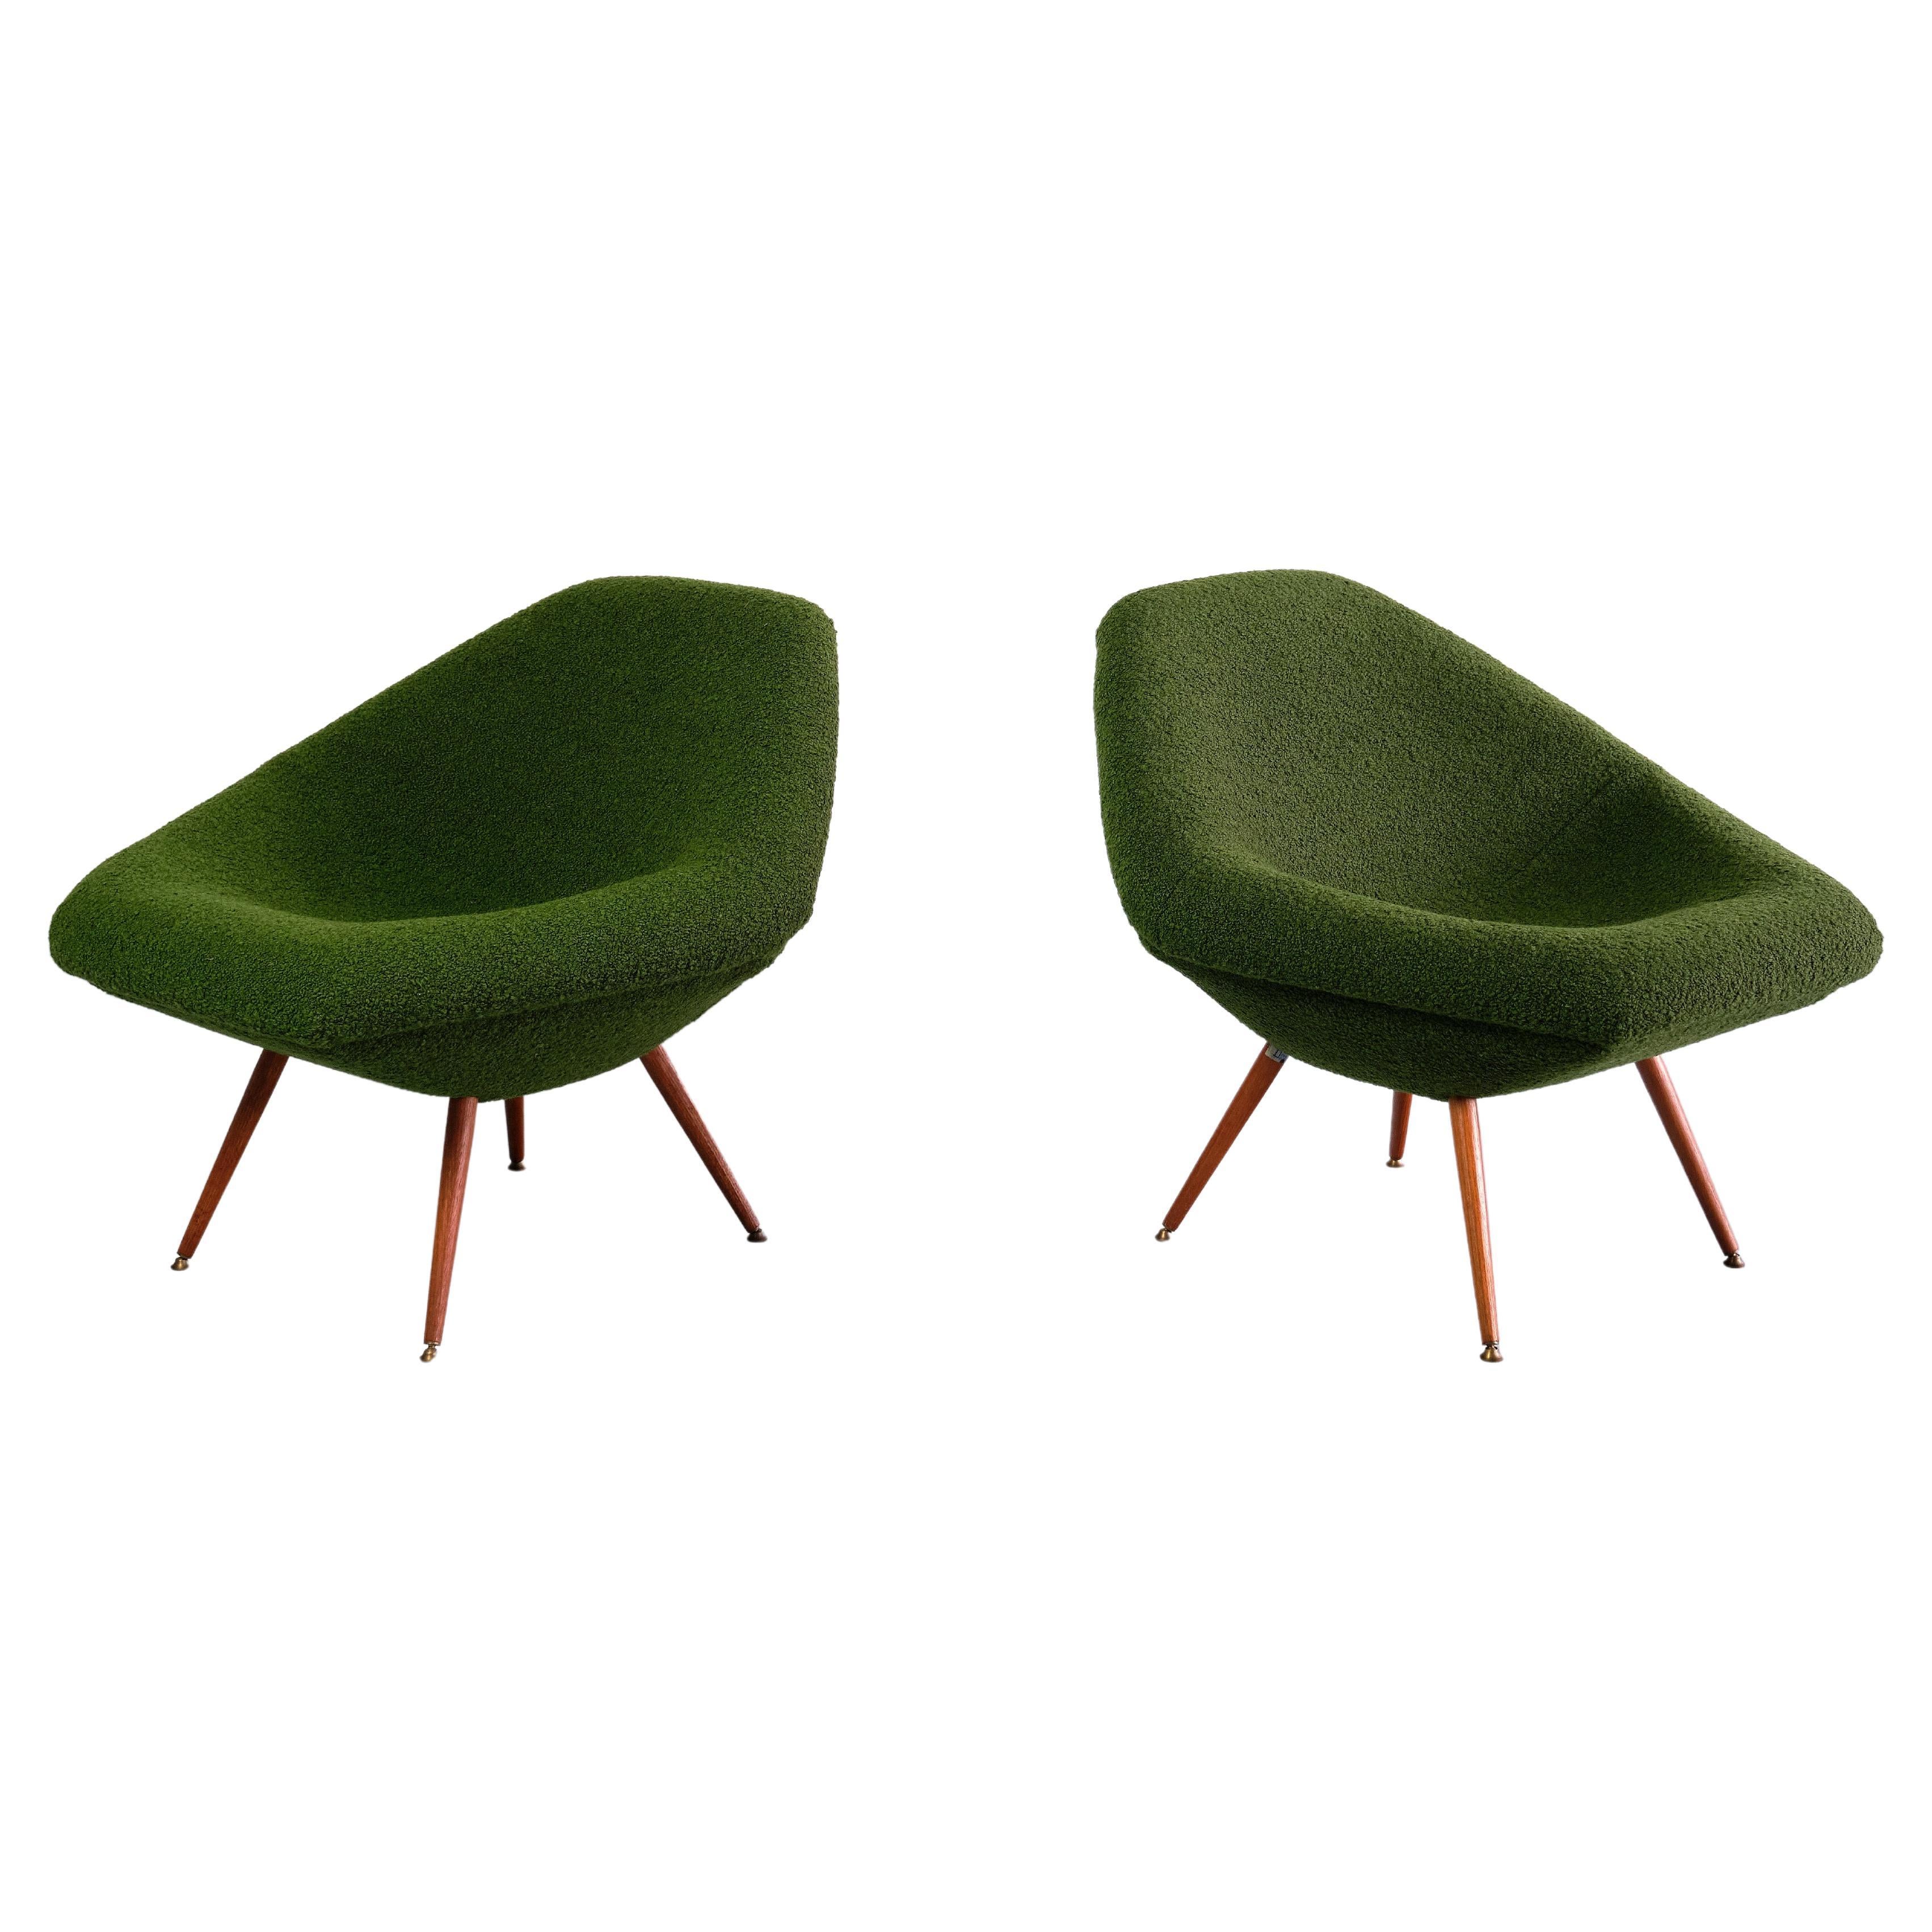 Pair of Arne Dahlén Lounge Chairs in Green Bouclé and Teak, Sweden, 1960s